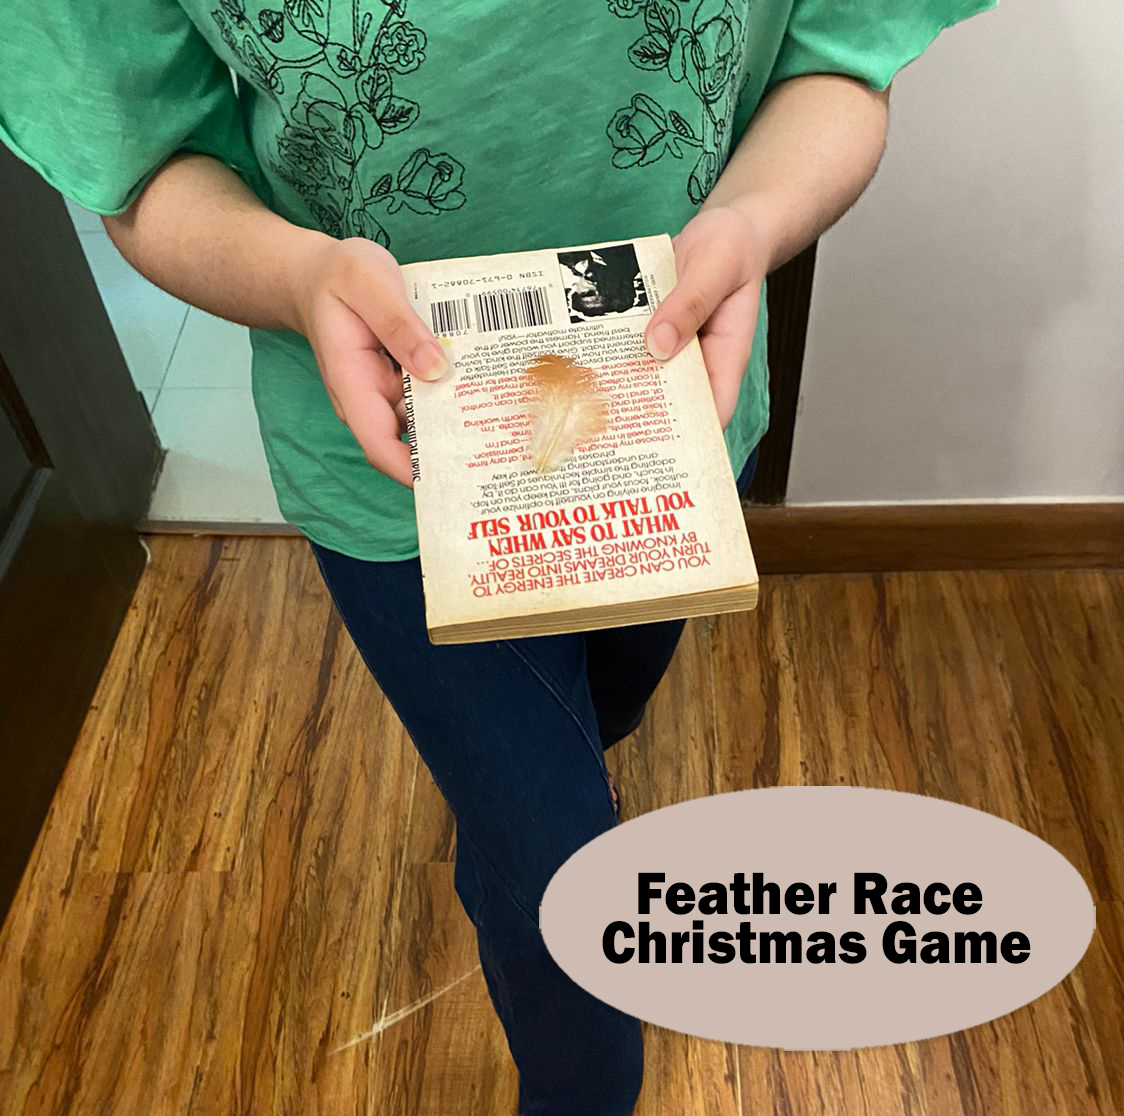 Feather Race, a fun Christmas Game 